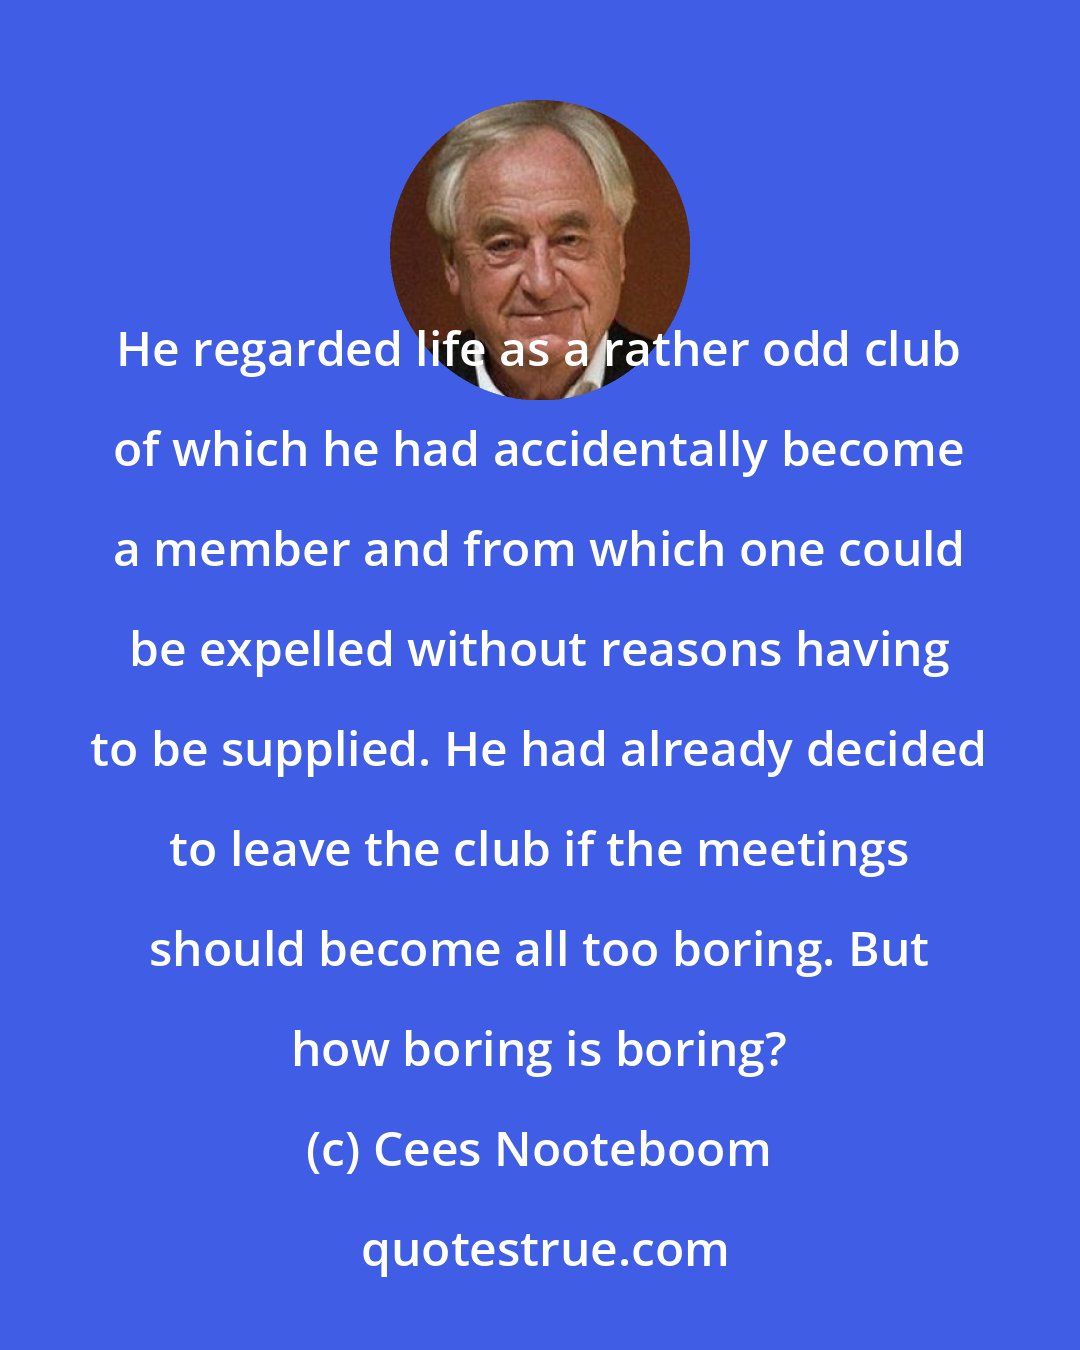 Cees Nooteboom: He regarded life as a rather odd club of which he had accidentally become a member and from which one could be expelled without reasons having to be supplied. He had already decided to leave the club if the meetings should become all too boring. But how boring is boring?